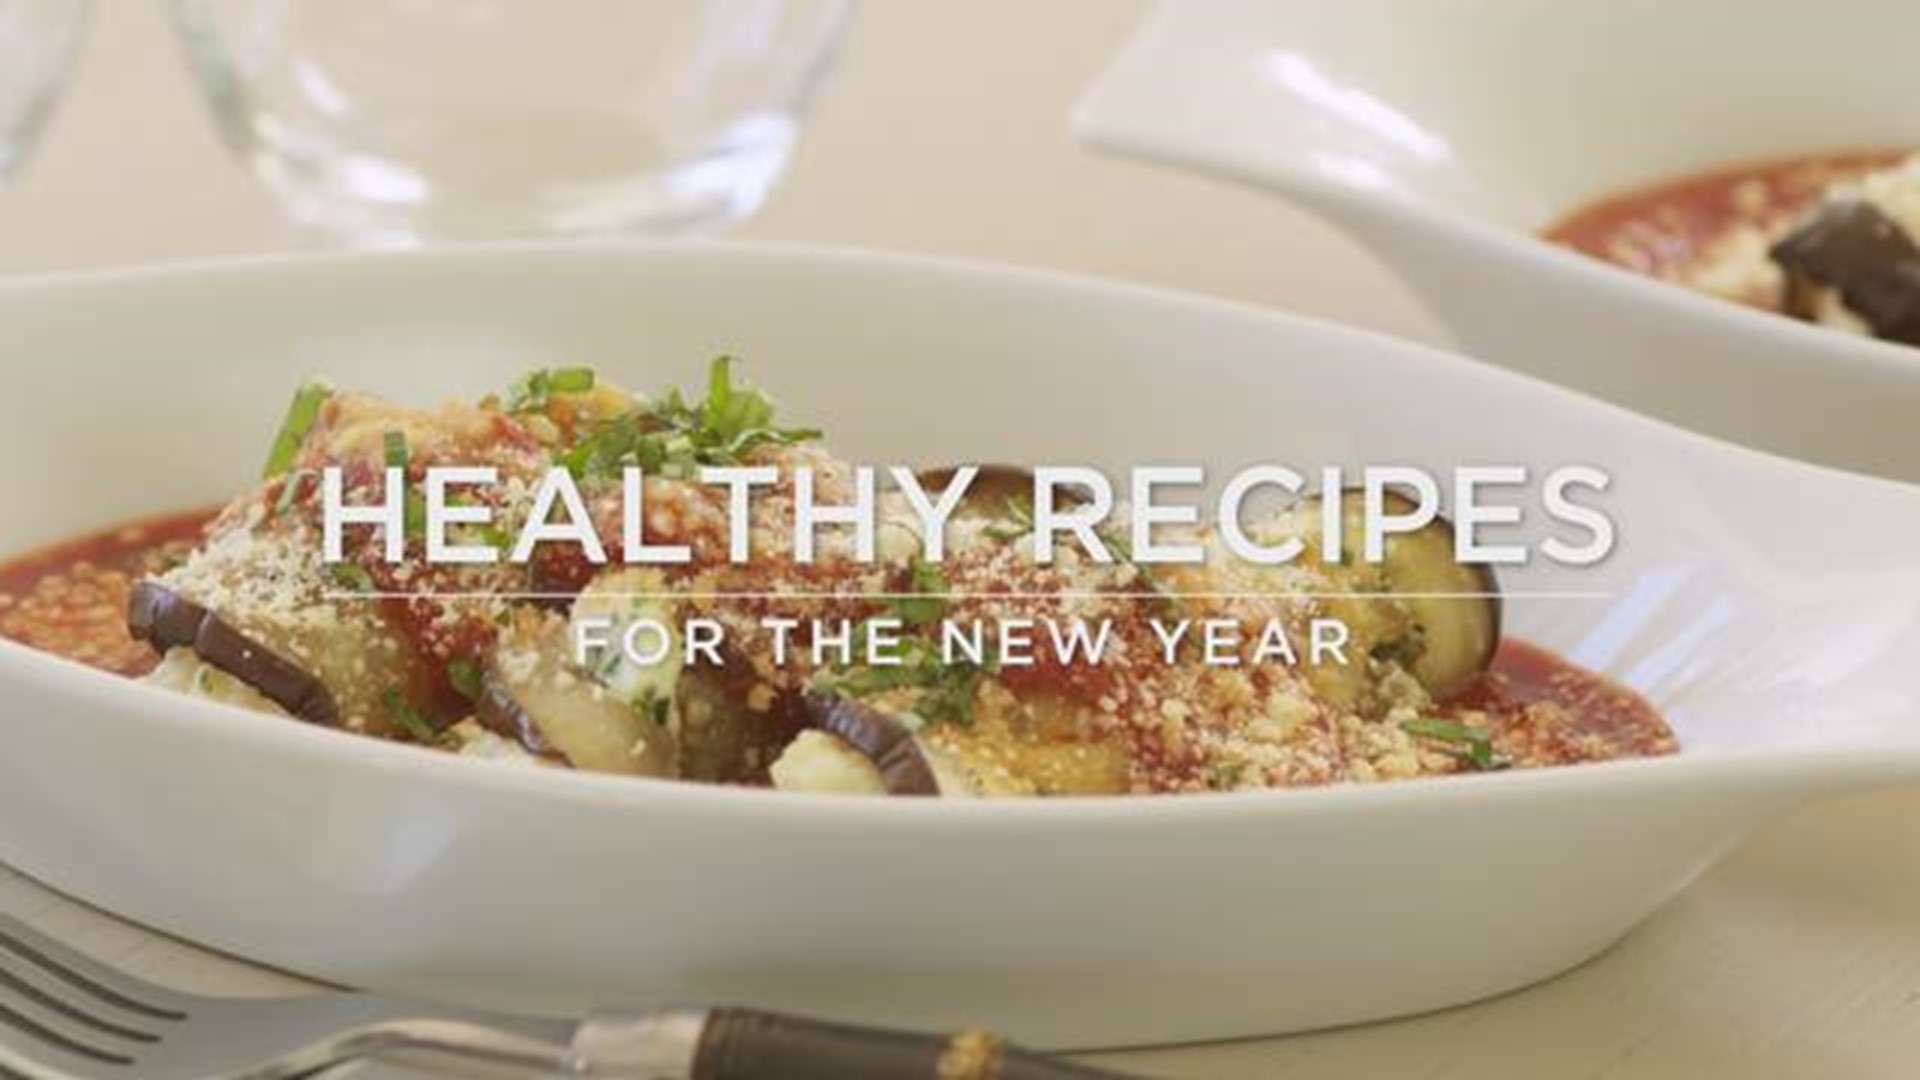 Keep your 2018 healthy eating resolution on track with these 5 healthy recipes for the new year.